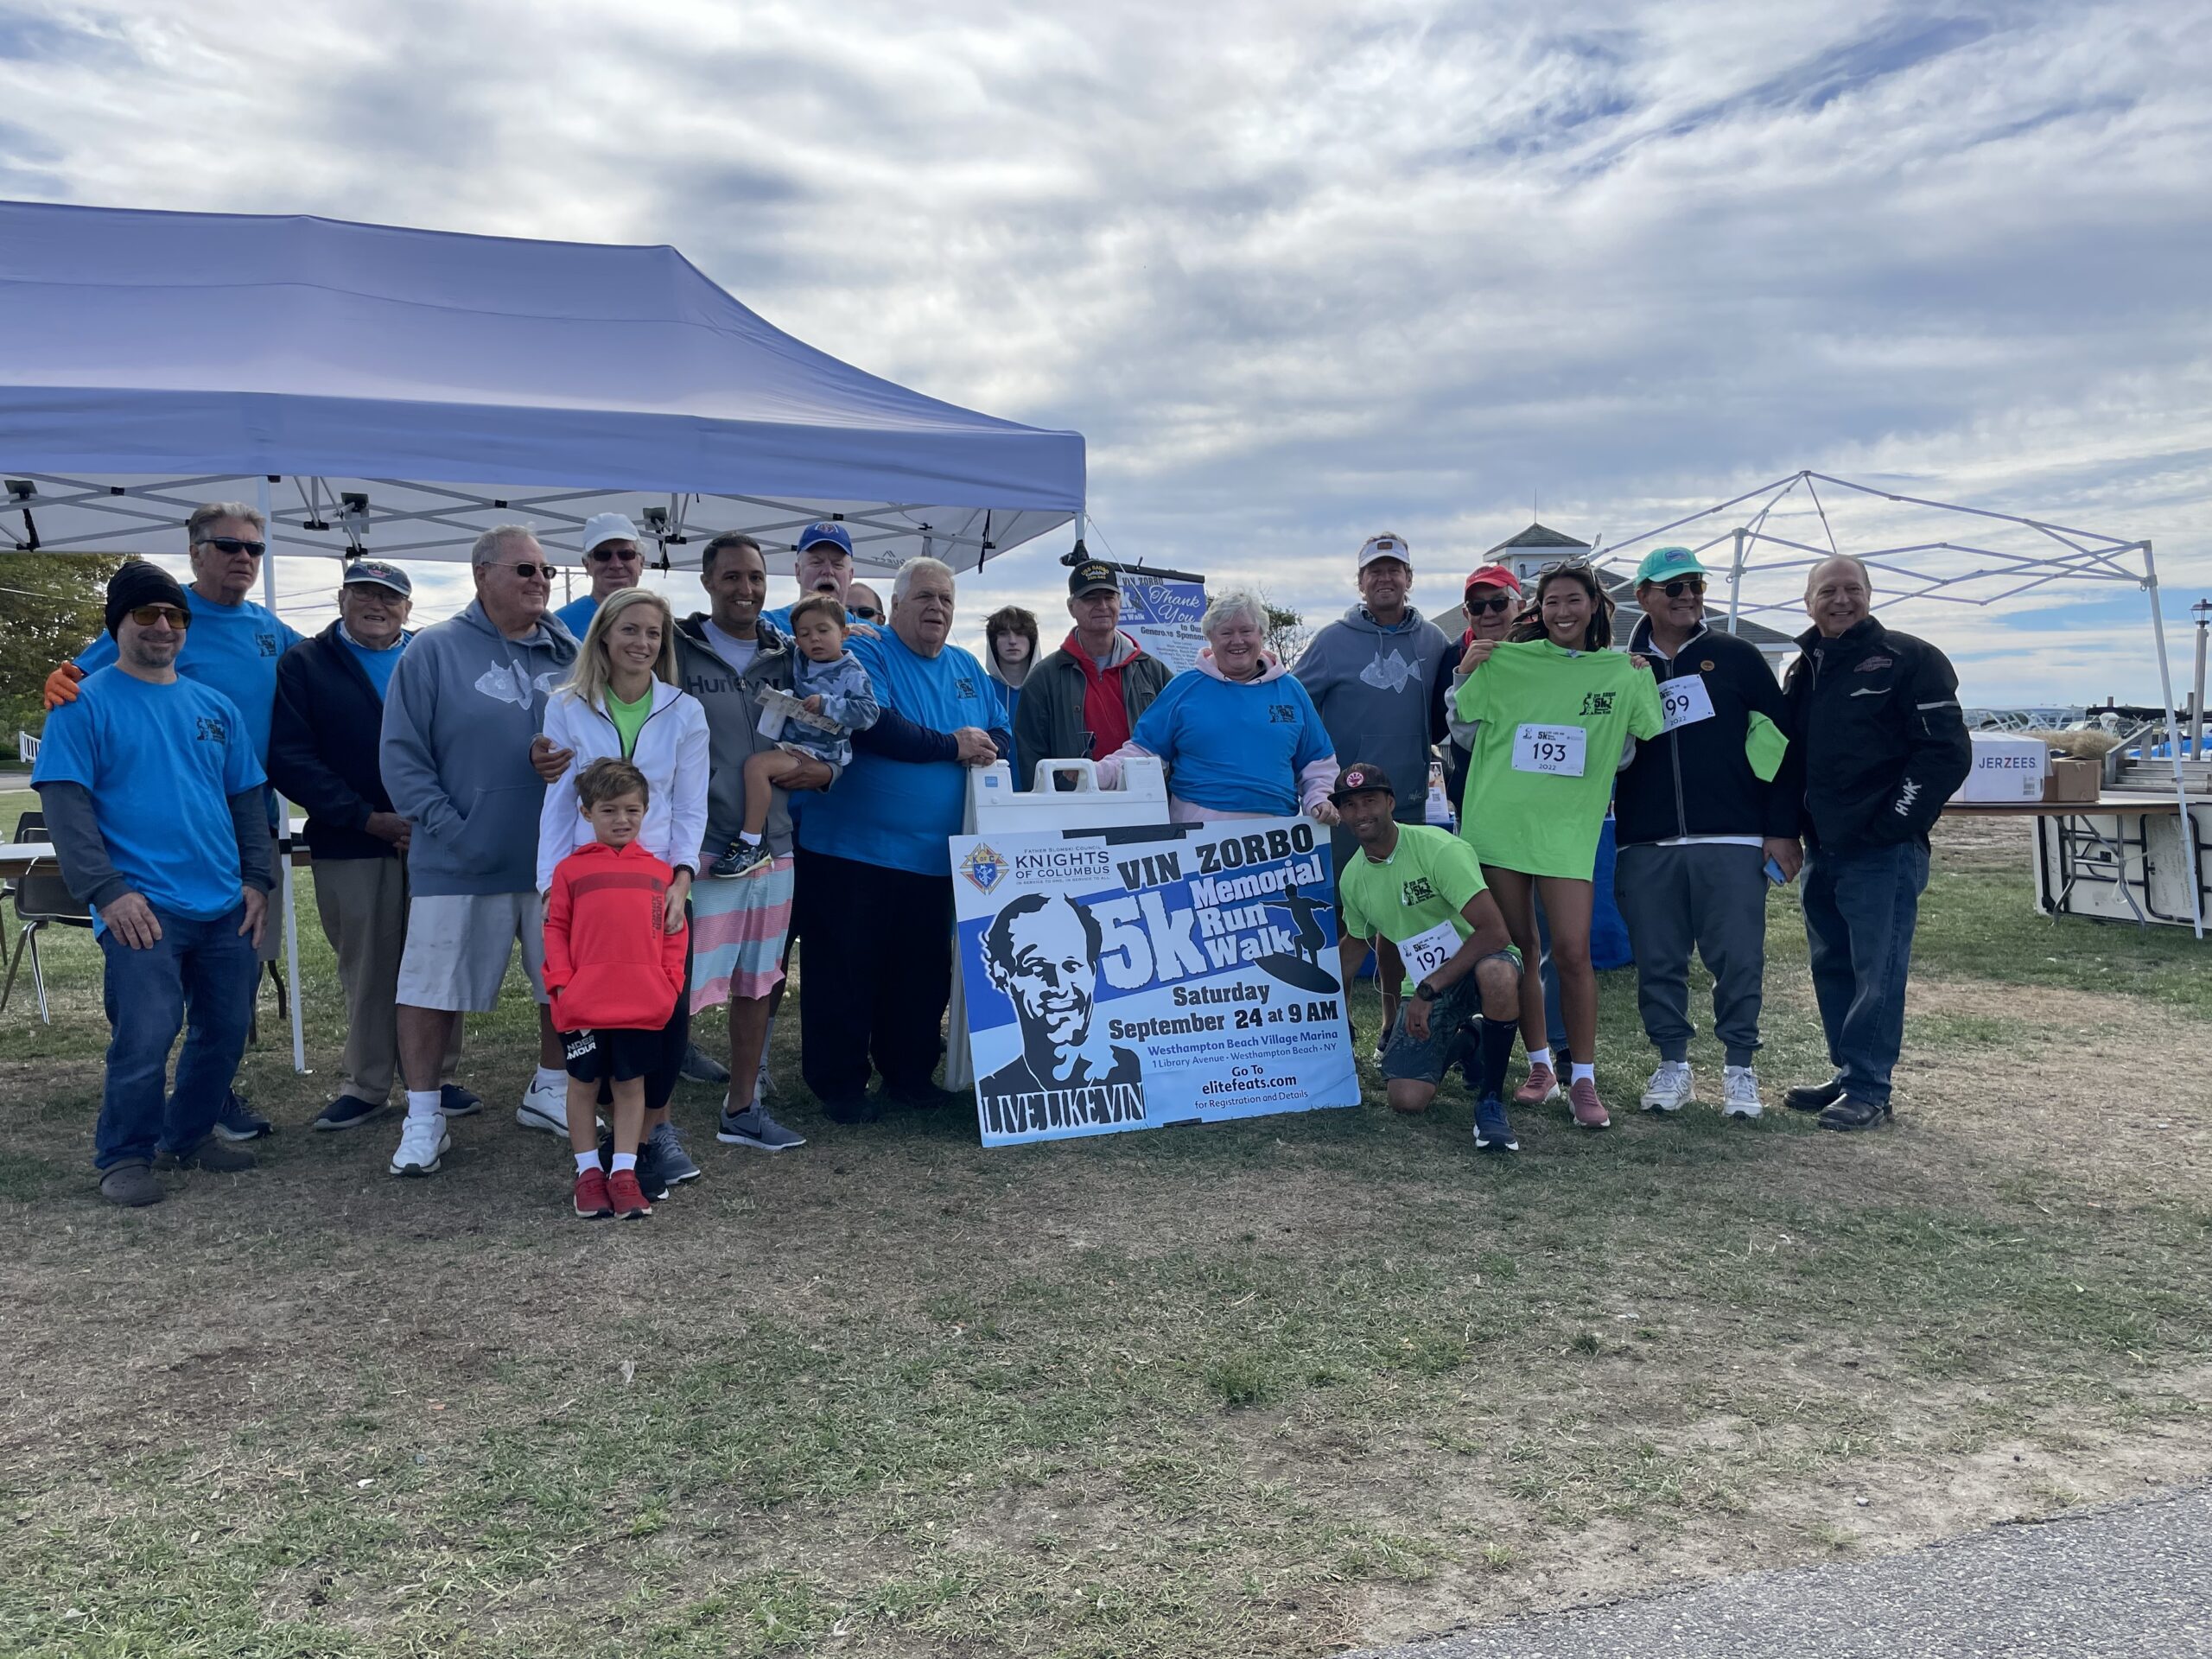 Members of the Father Slomski Council of the Knights of Columbus with volunteers, including
Vin's sons Justin, Chris and their families, for the Vin Zorbo 5K Memorial Run. Funds raised will go to the Prostate Cancer Foundation, the East End Chapter of Surfrider, Angela's House, as well as Knights of Columbus charities. COURTESY FATHER SLOMSKI COUNCIL